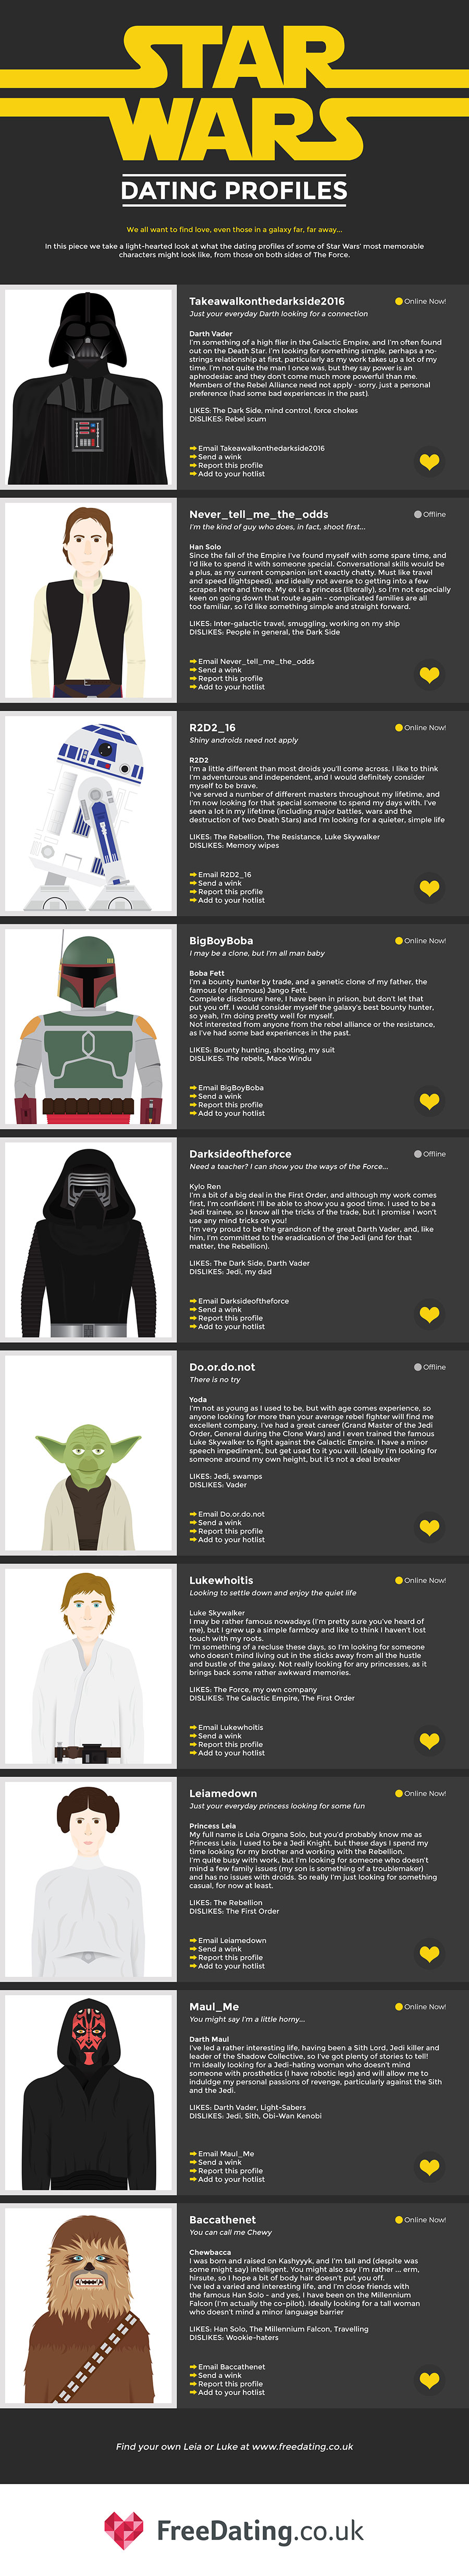 Star Wars Dating Profiles by FreeDating.co.uk